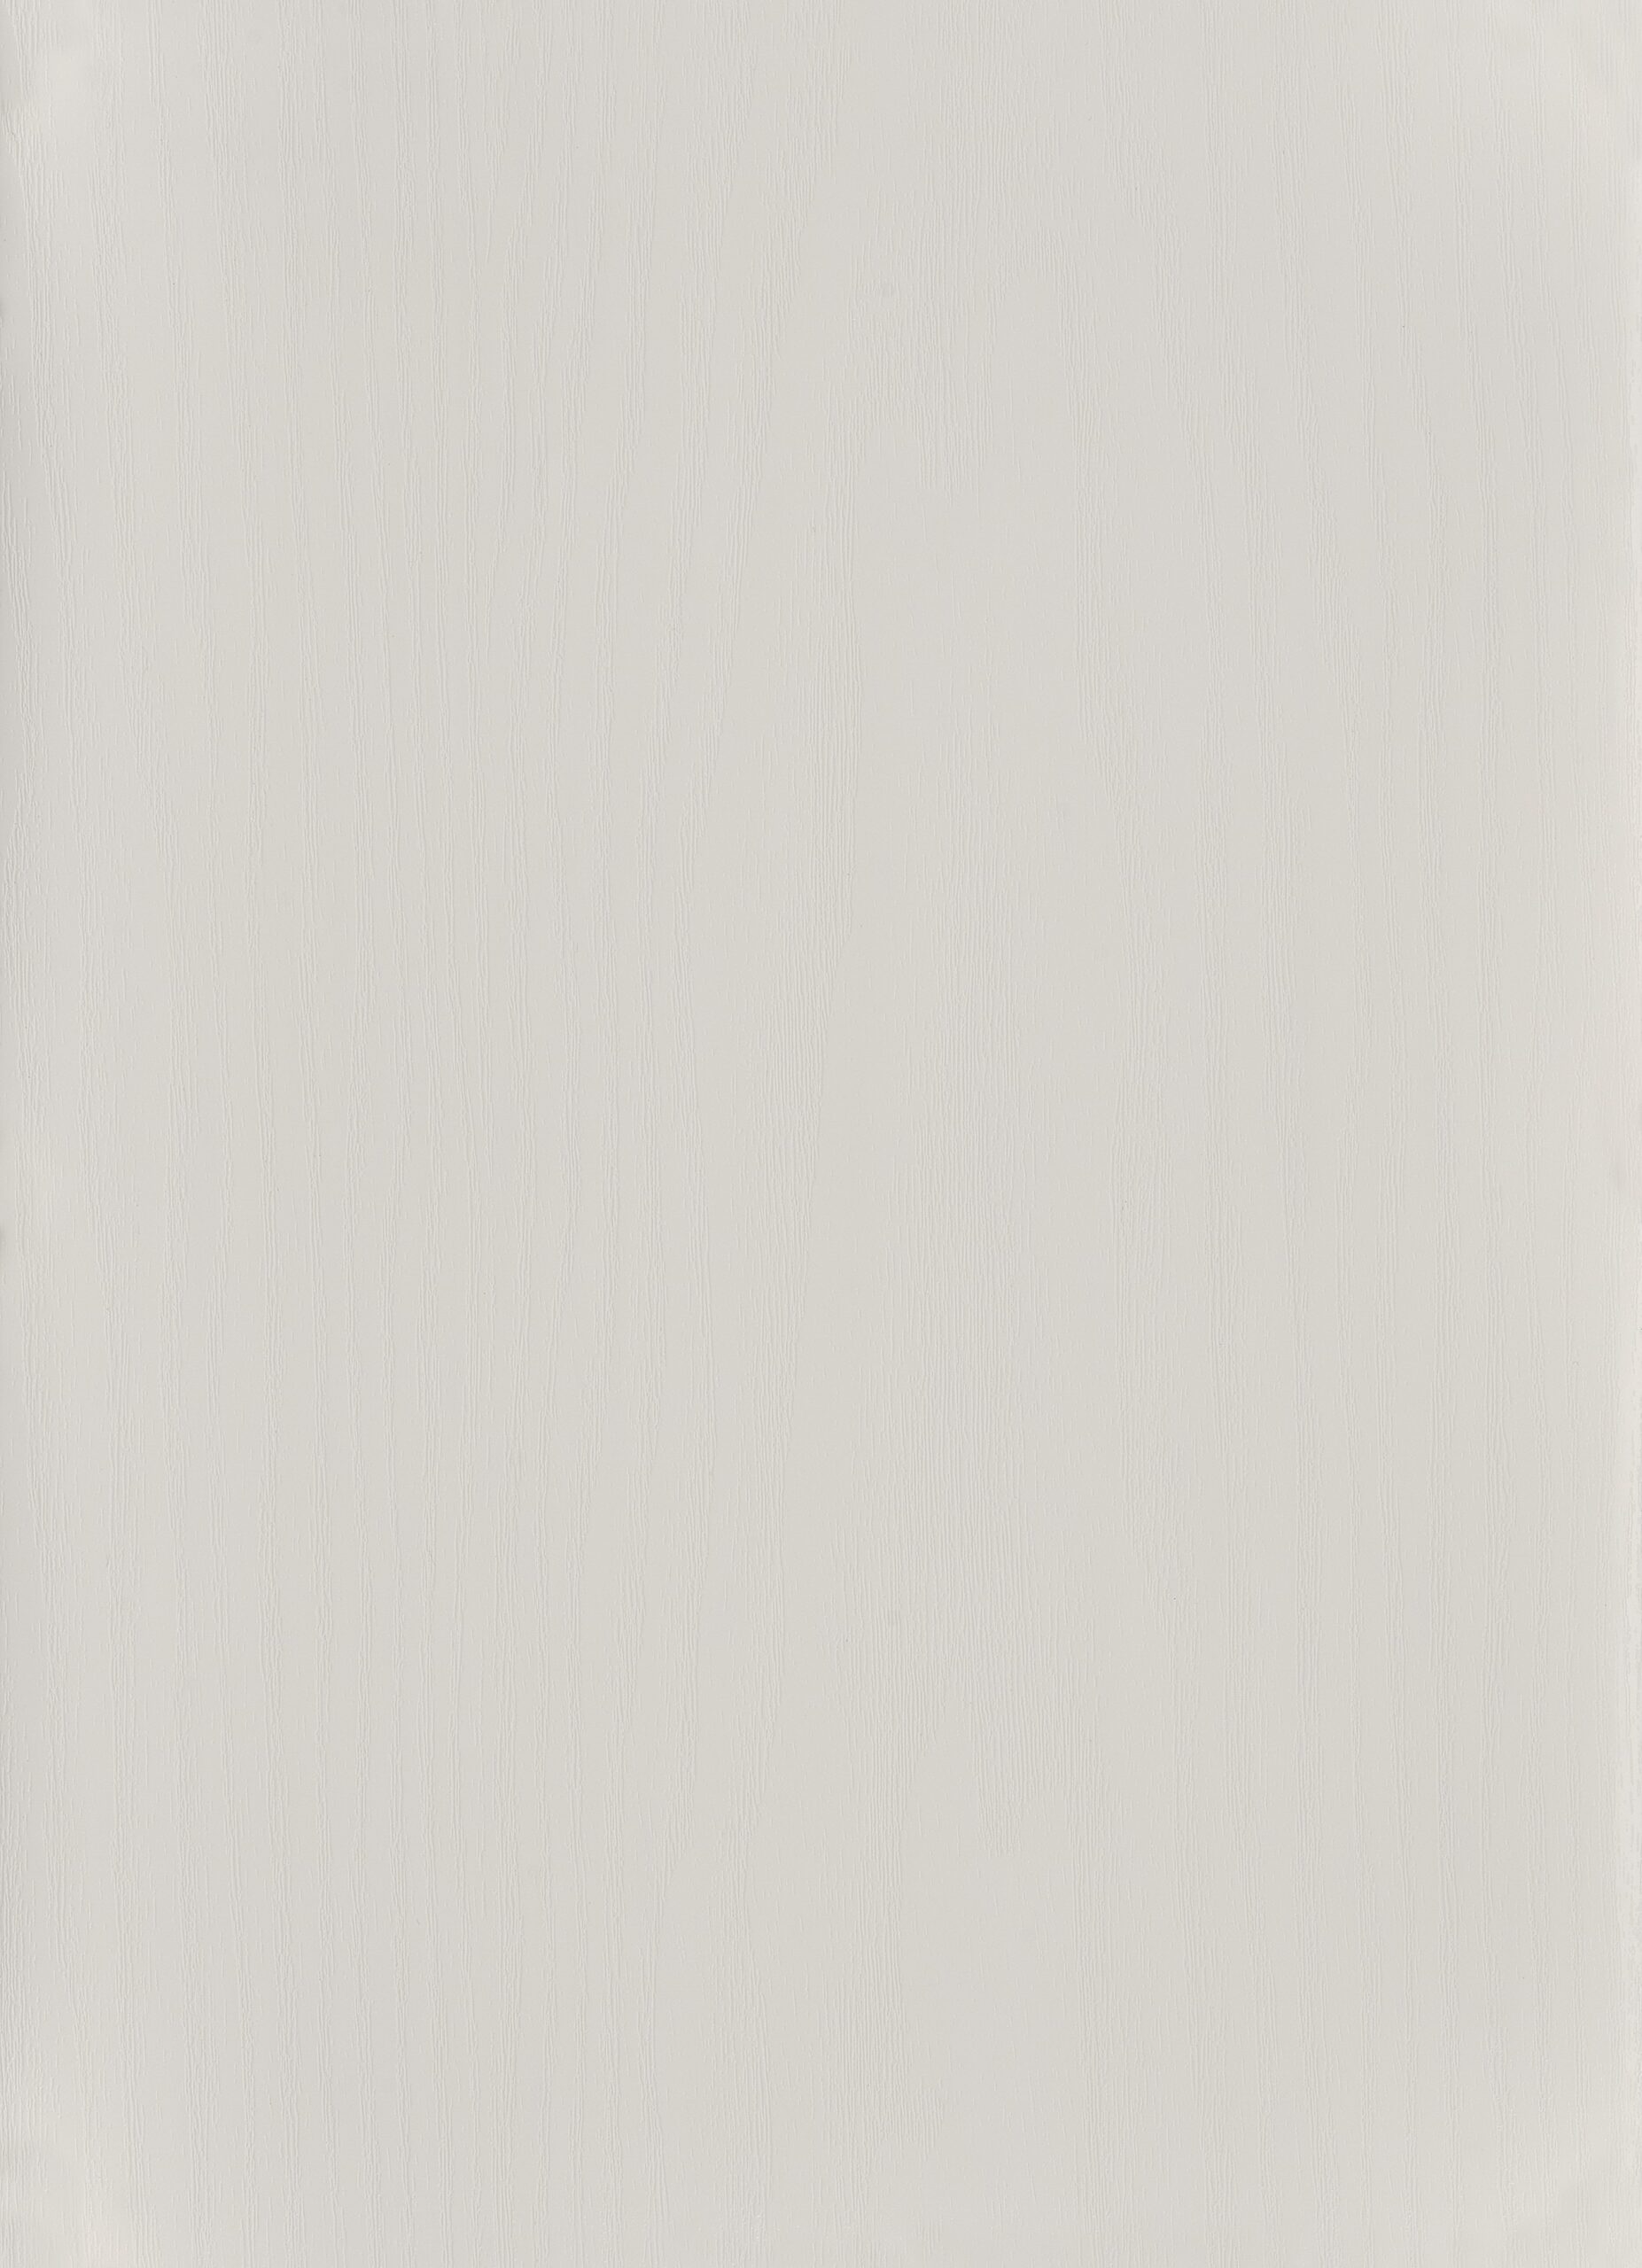 https://www.residencecollection.co.uk/wp-content/uploads/2022/05/Grained-White-1-scaled.jpg